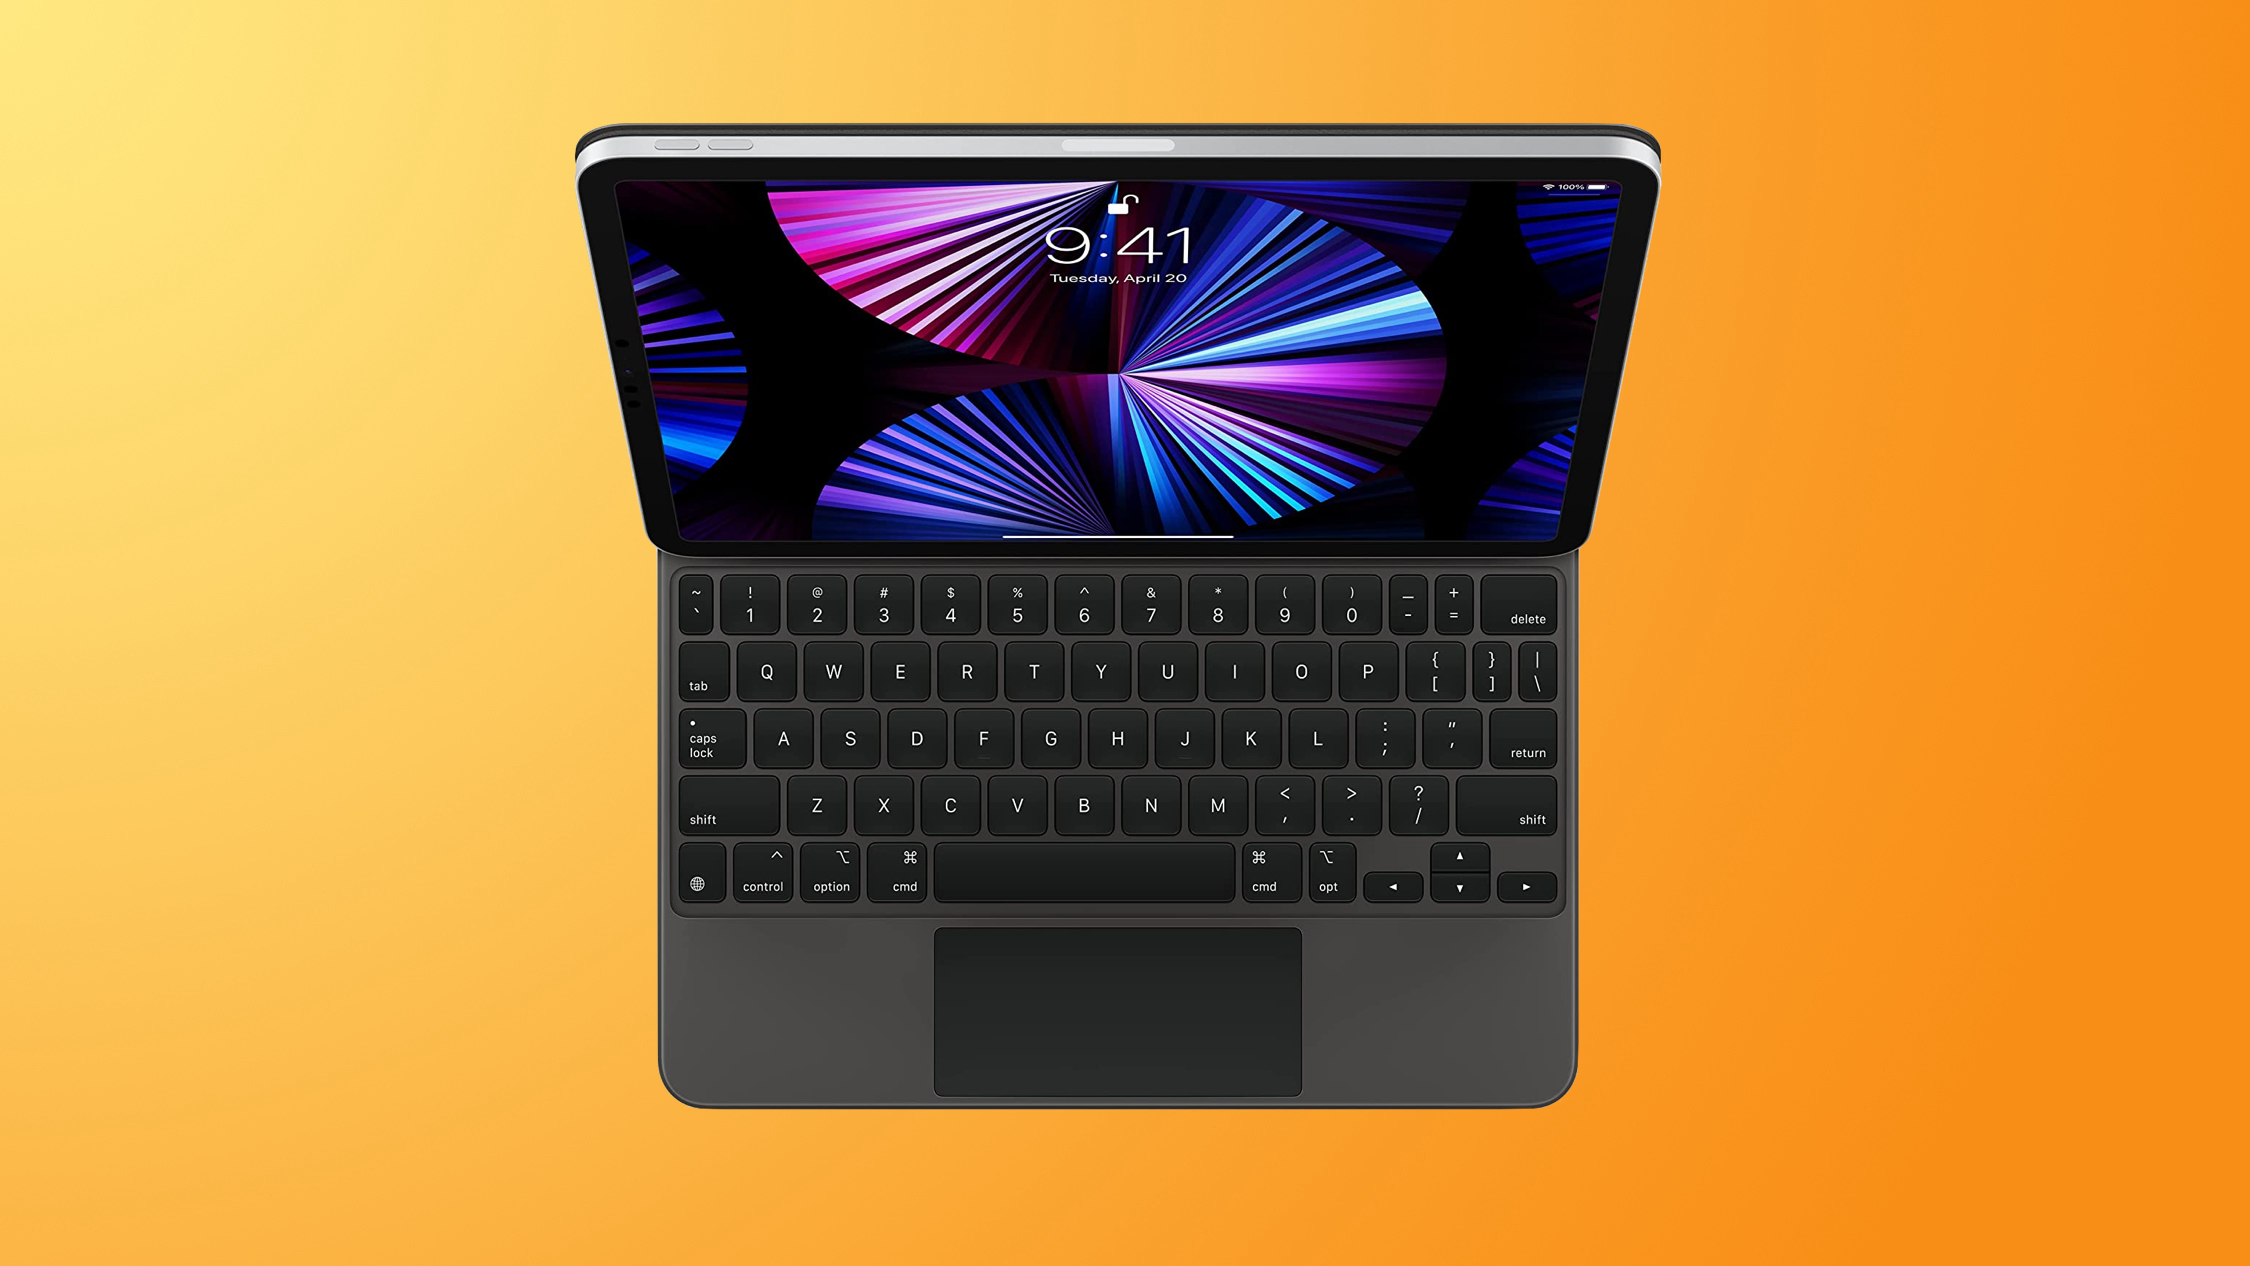 Deals: Amazon Introduces New Sales on iPad Magic Keyboards and Official iPhone Cases